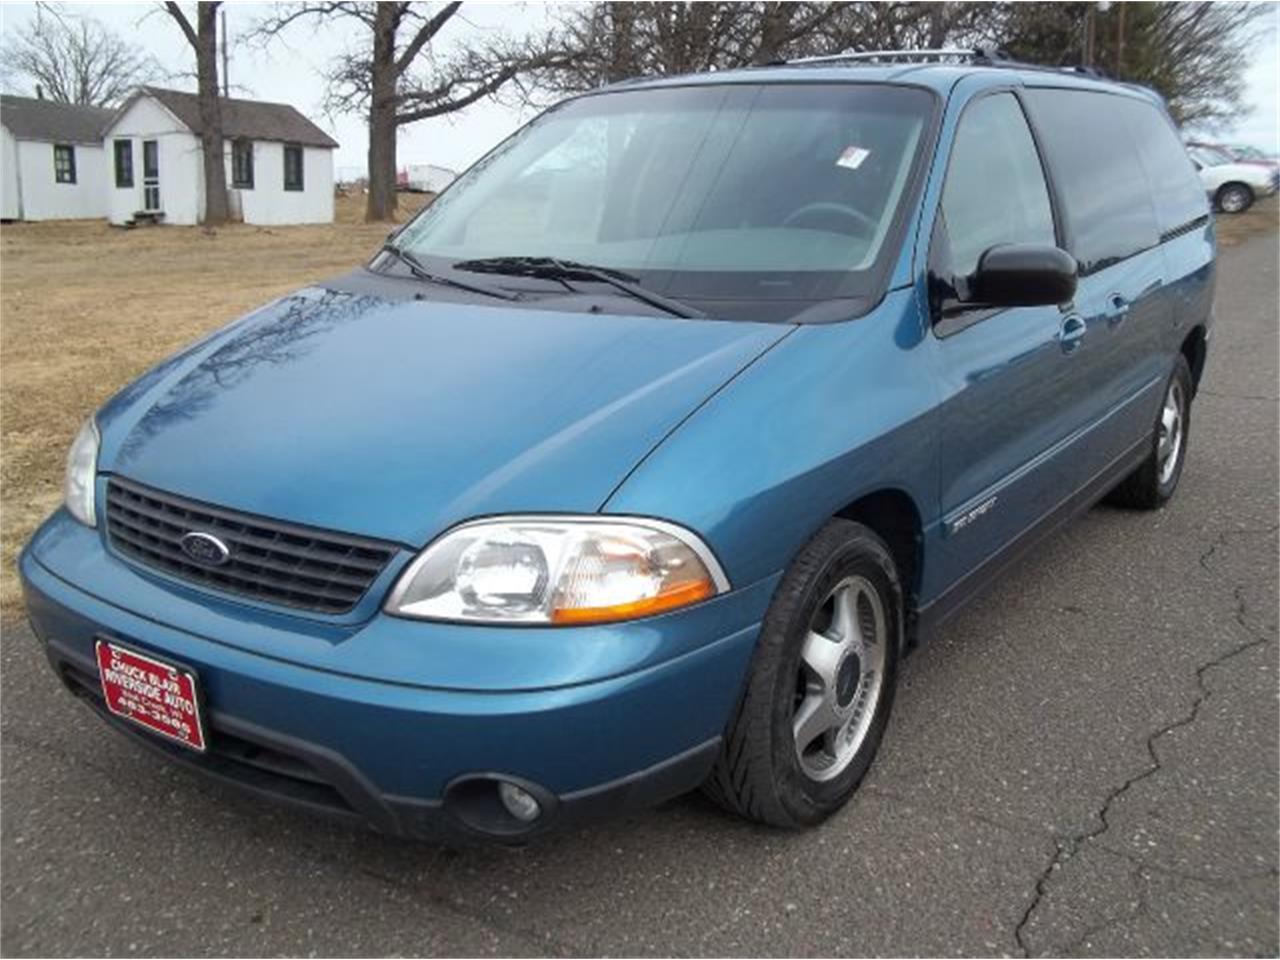 2001 ford windstar transmission replacement cost